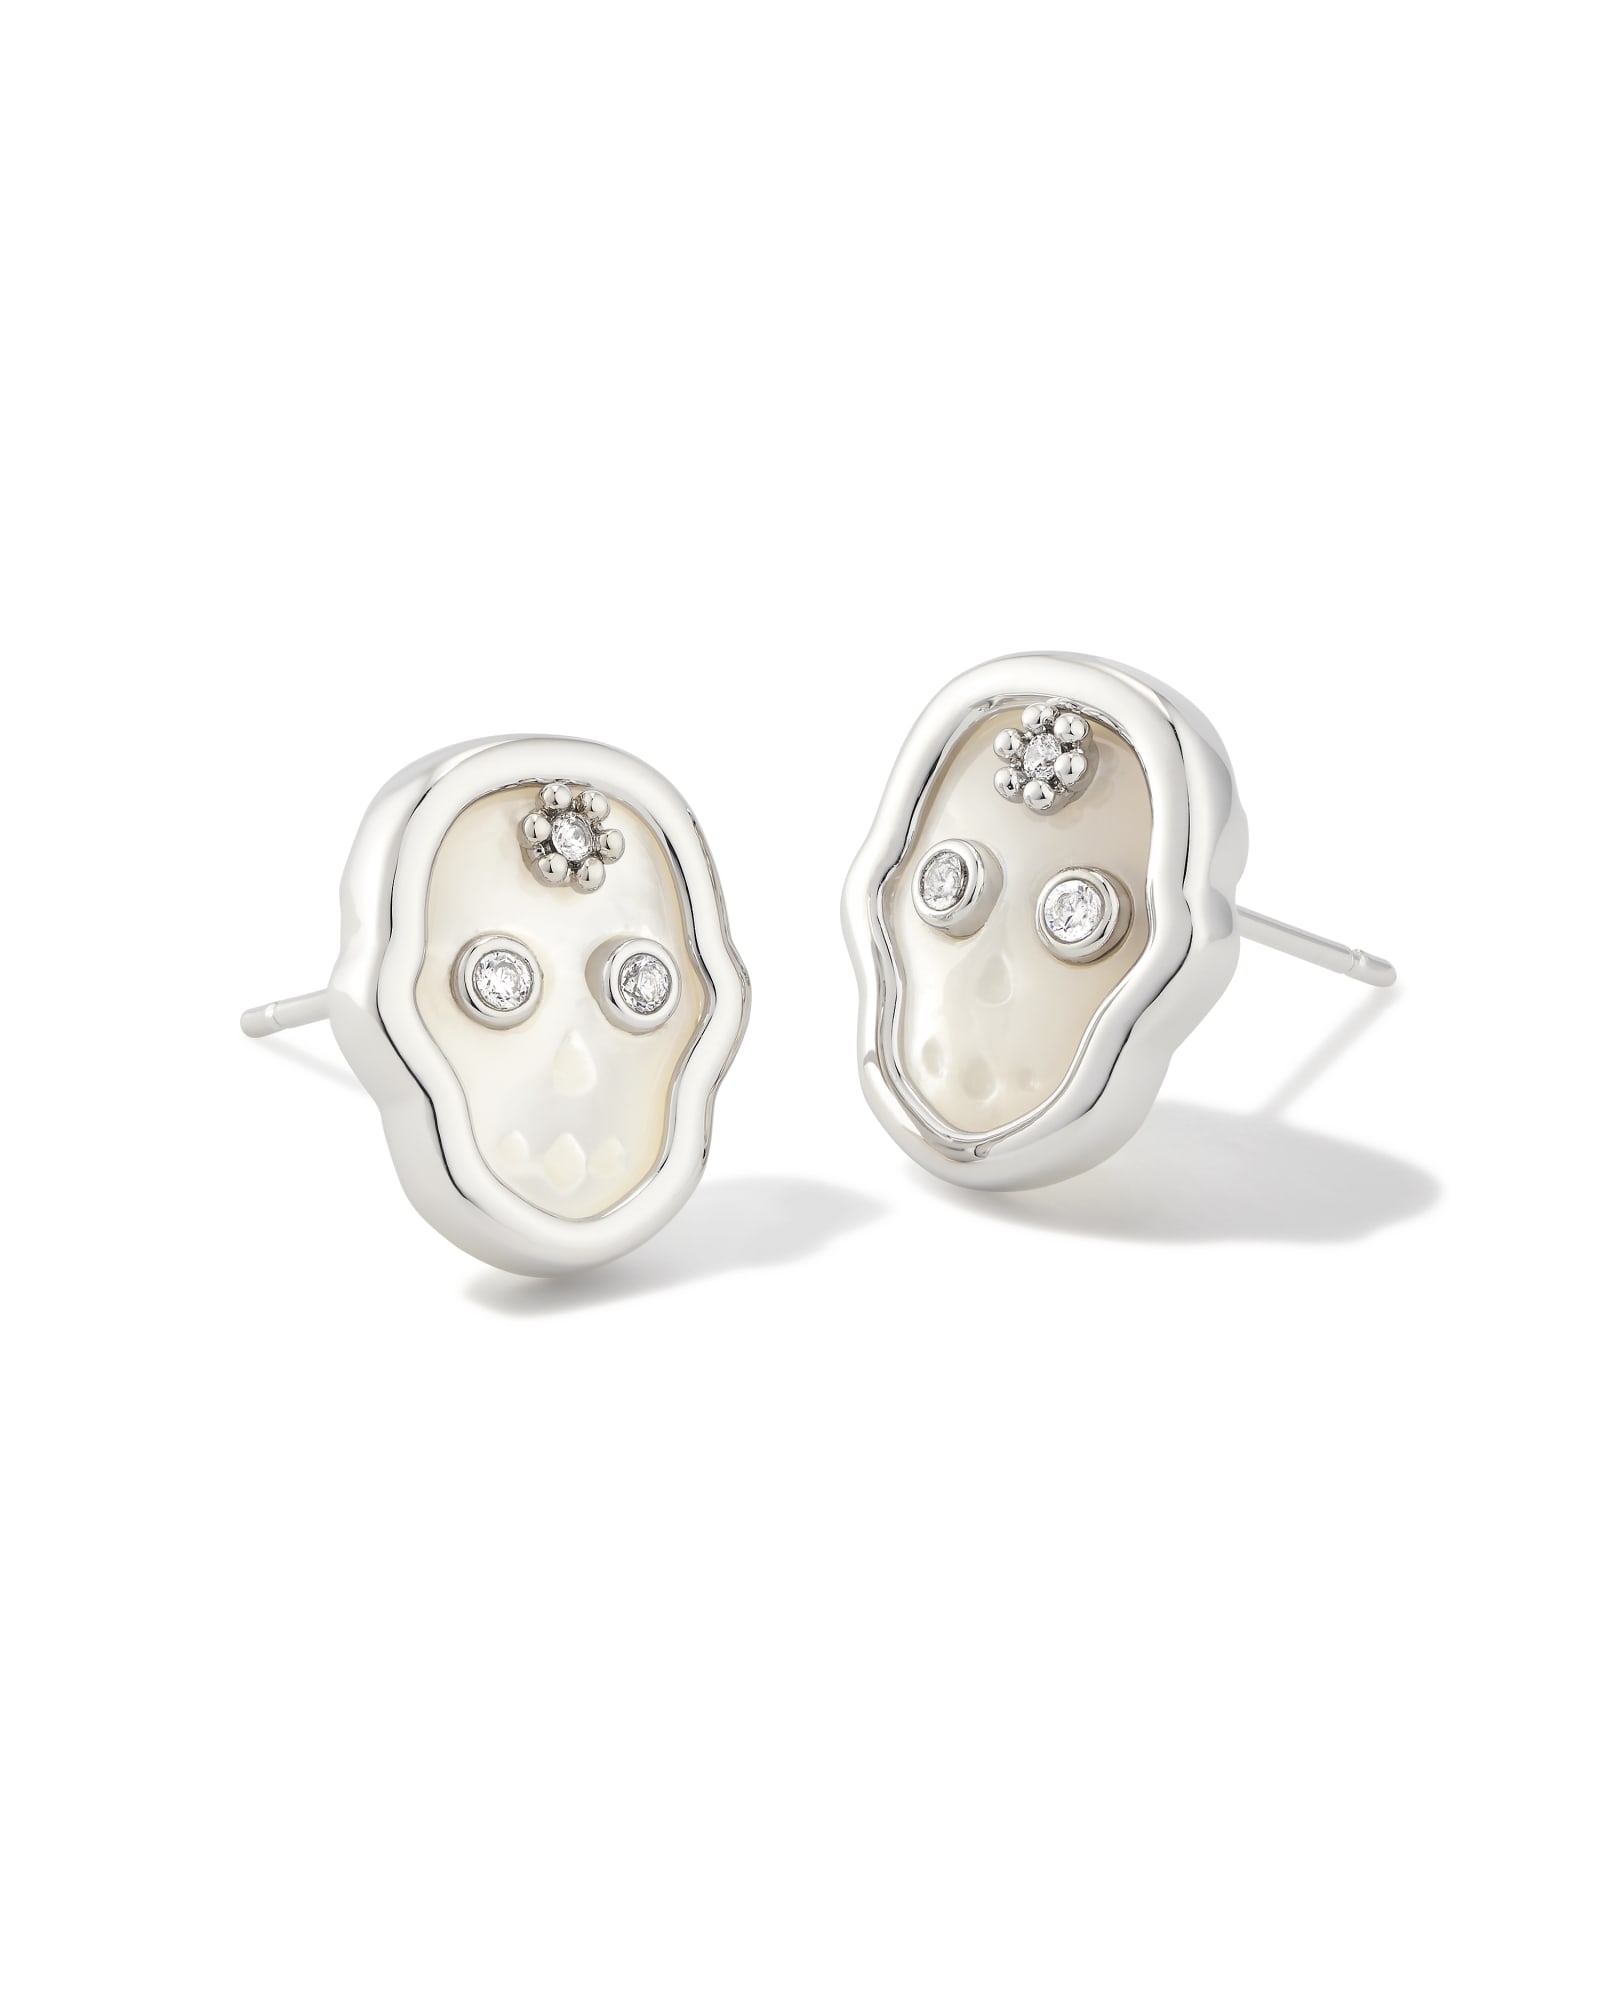 Skeleton Convertible Silver Statement Earrings in Ivory Mother-of-Pearl